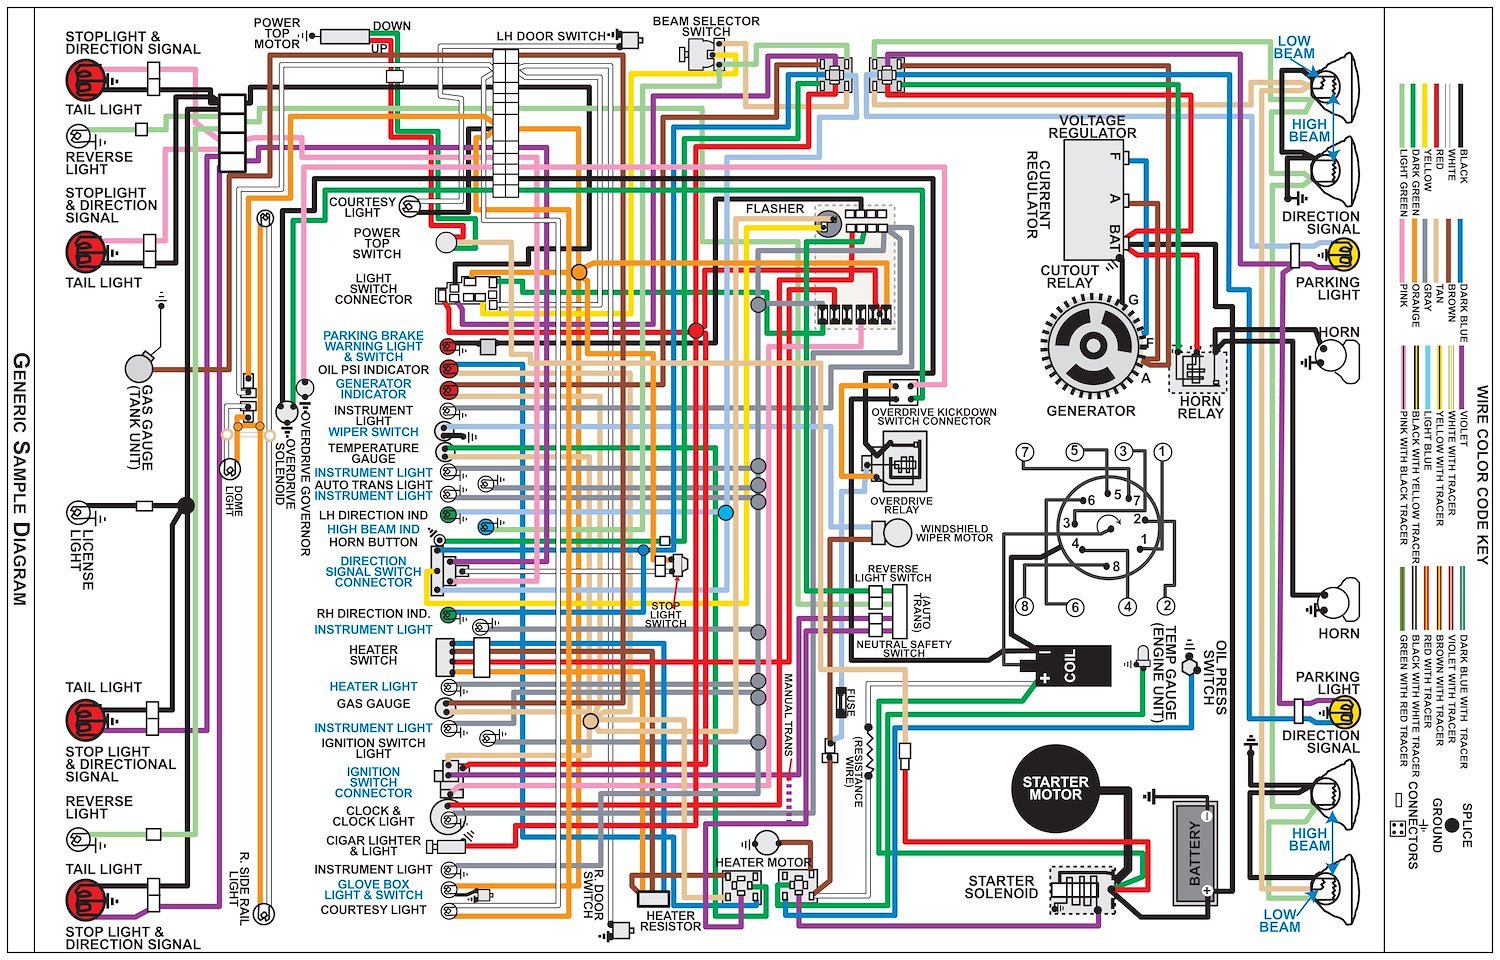 Wiring Diagram for 1969 Chevy Chevelle, El Camino,